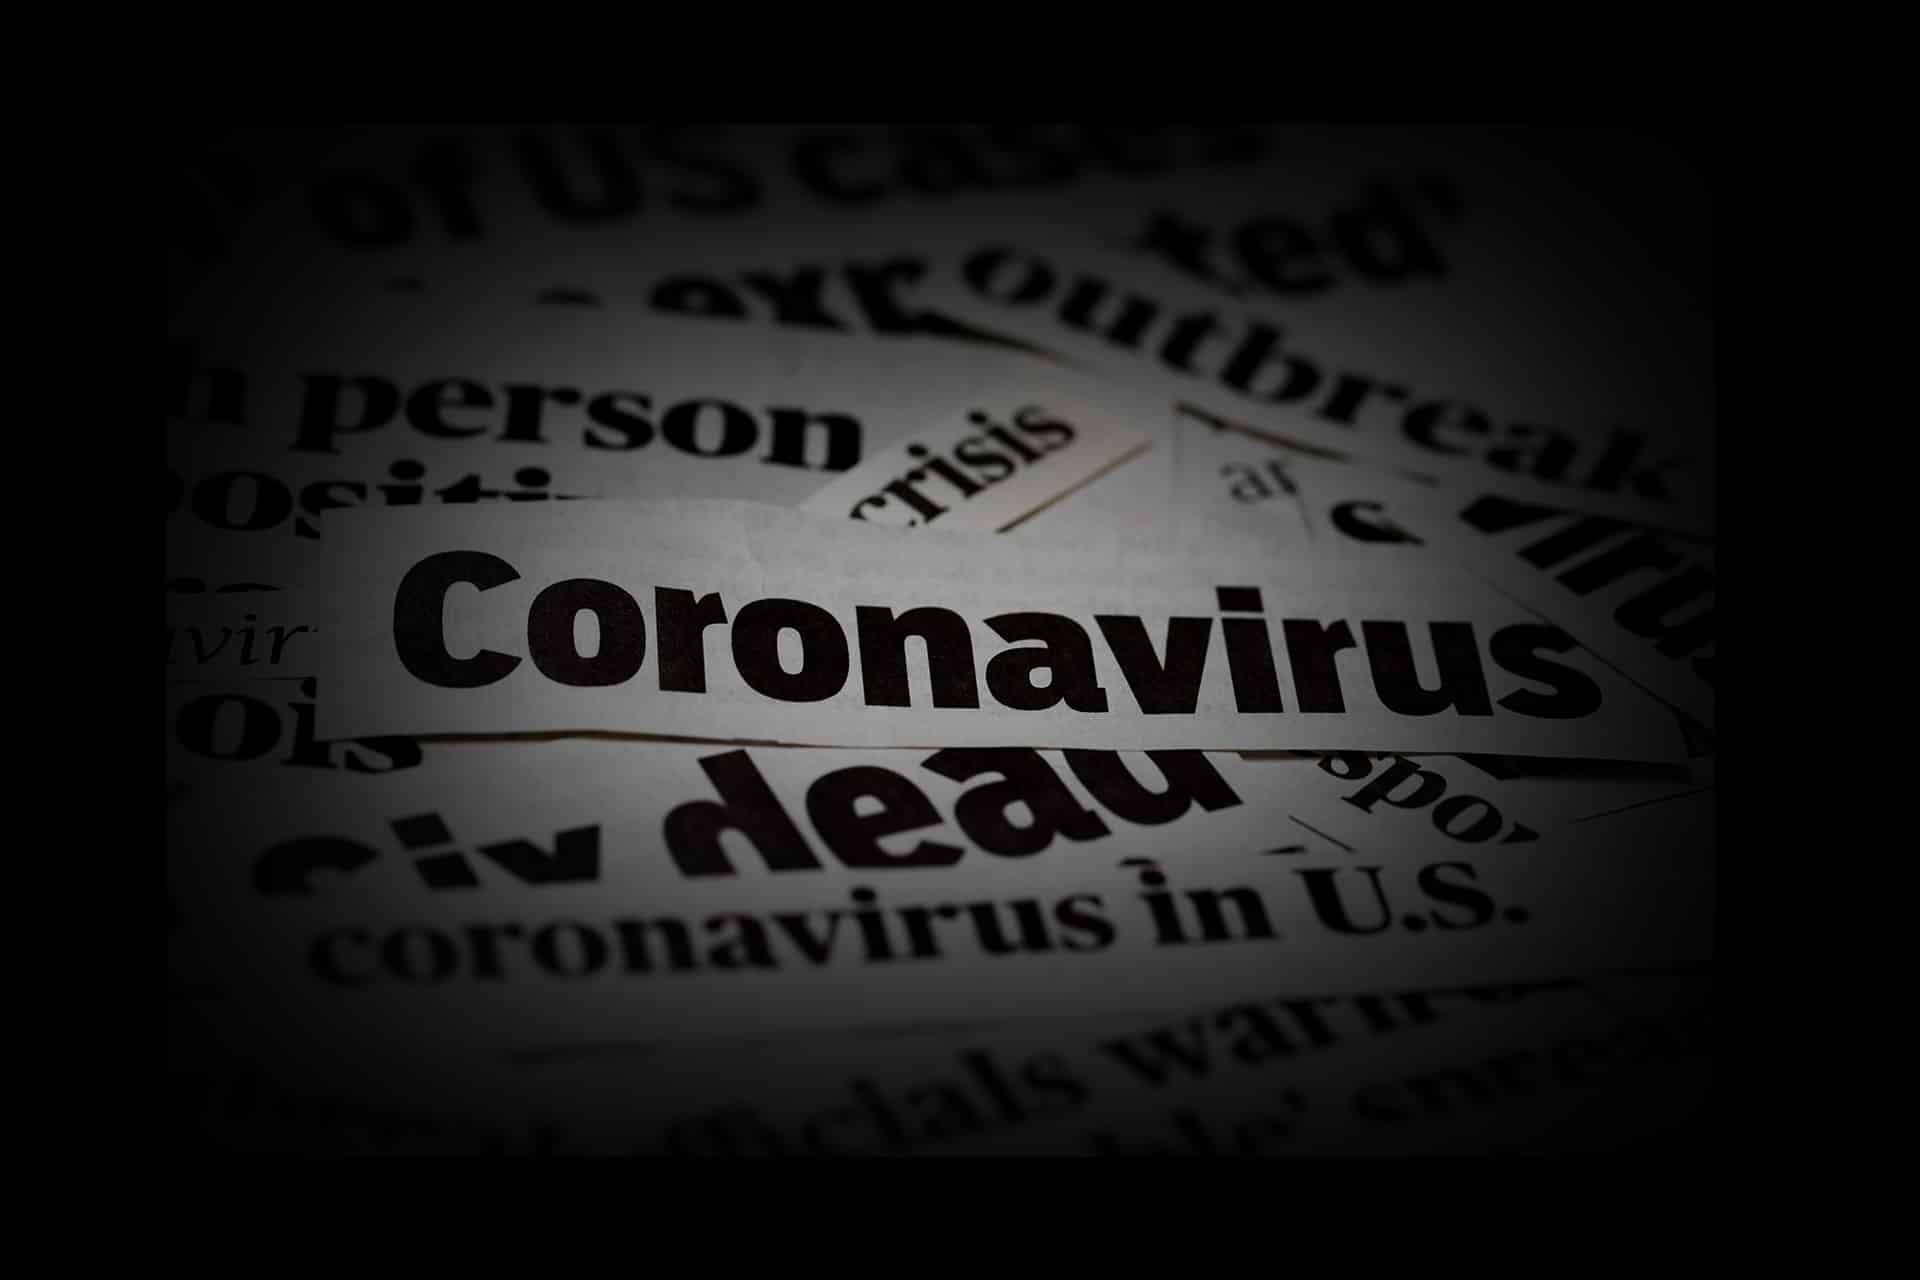 A close-up image shows the word "Coronavirus" prominently in black text, with other partially visible newspaper headlines and articles blurred in the background, highlighting media scrutiny related to the COVID-19 pandemic.